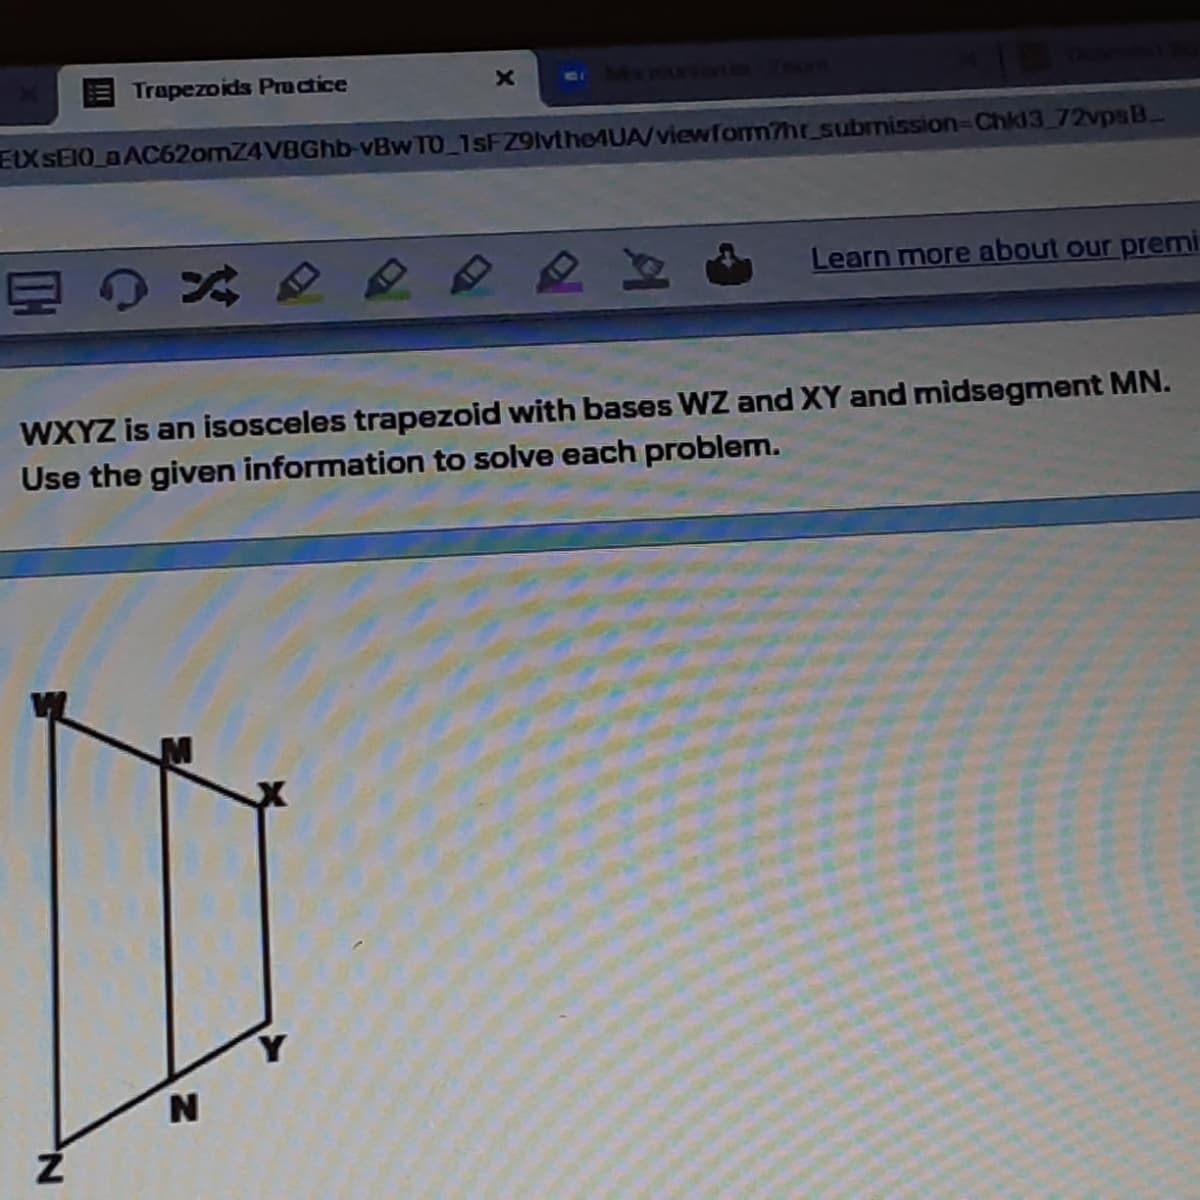 Trapezoids Pructice
one N
EX SEIO aAC62omZ4VBGhb-vBw TO 1sFZ9lvtheAUA/viewfom?hr submission-Chk13 72vpsB.
Learn more about our premi
WXYZ is an isosceles trapezoid with bases WZ and XY and midsegment MN.
Use the given information to solve each problem.
N
N.
